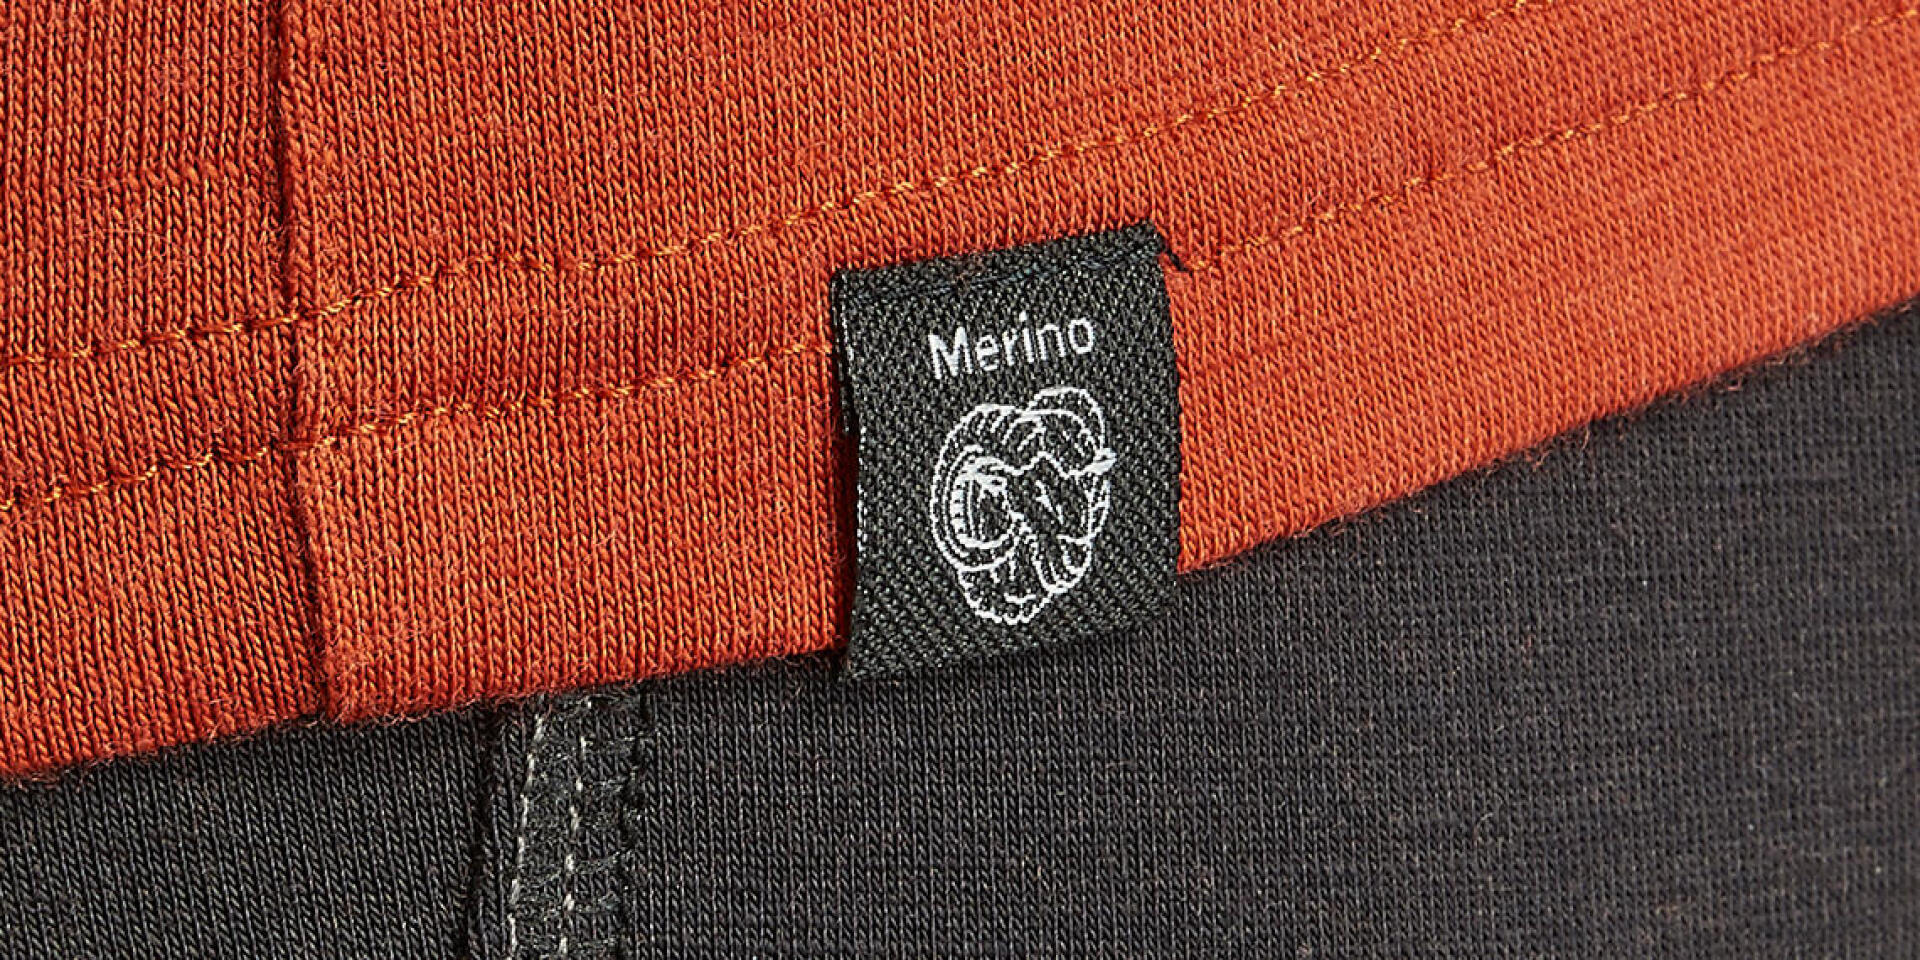 How to look after and repair Merino wool 